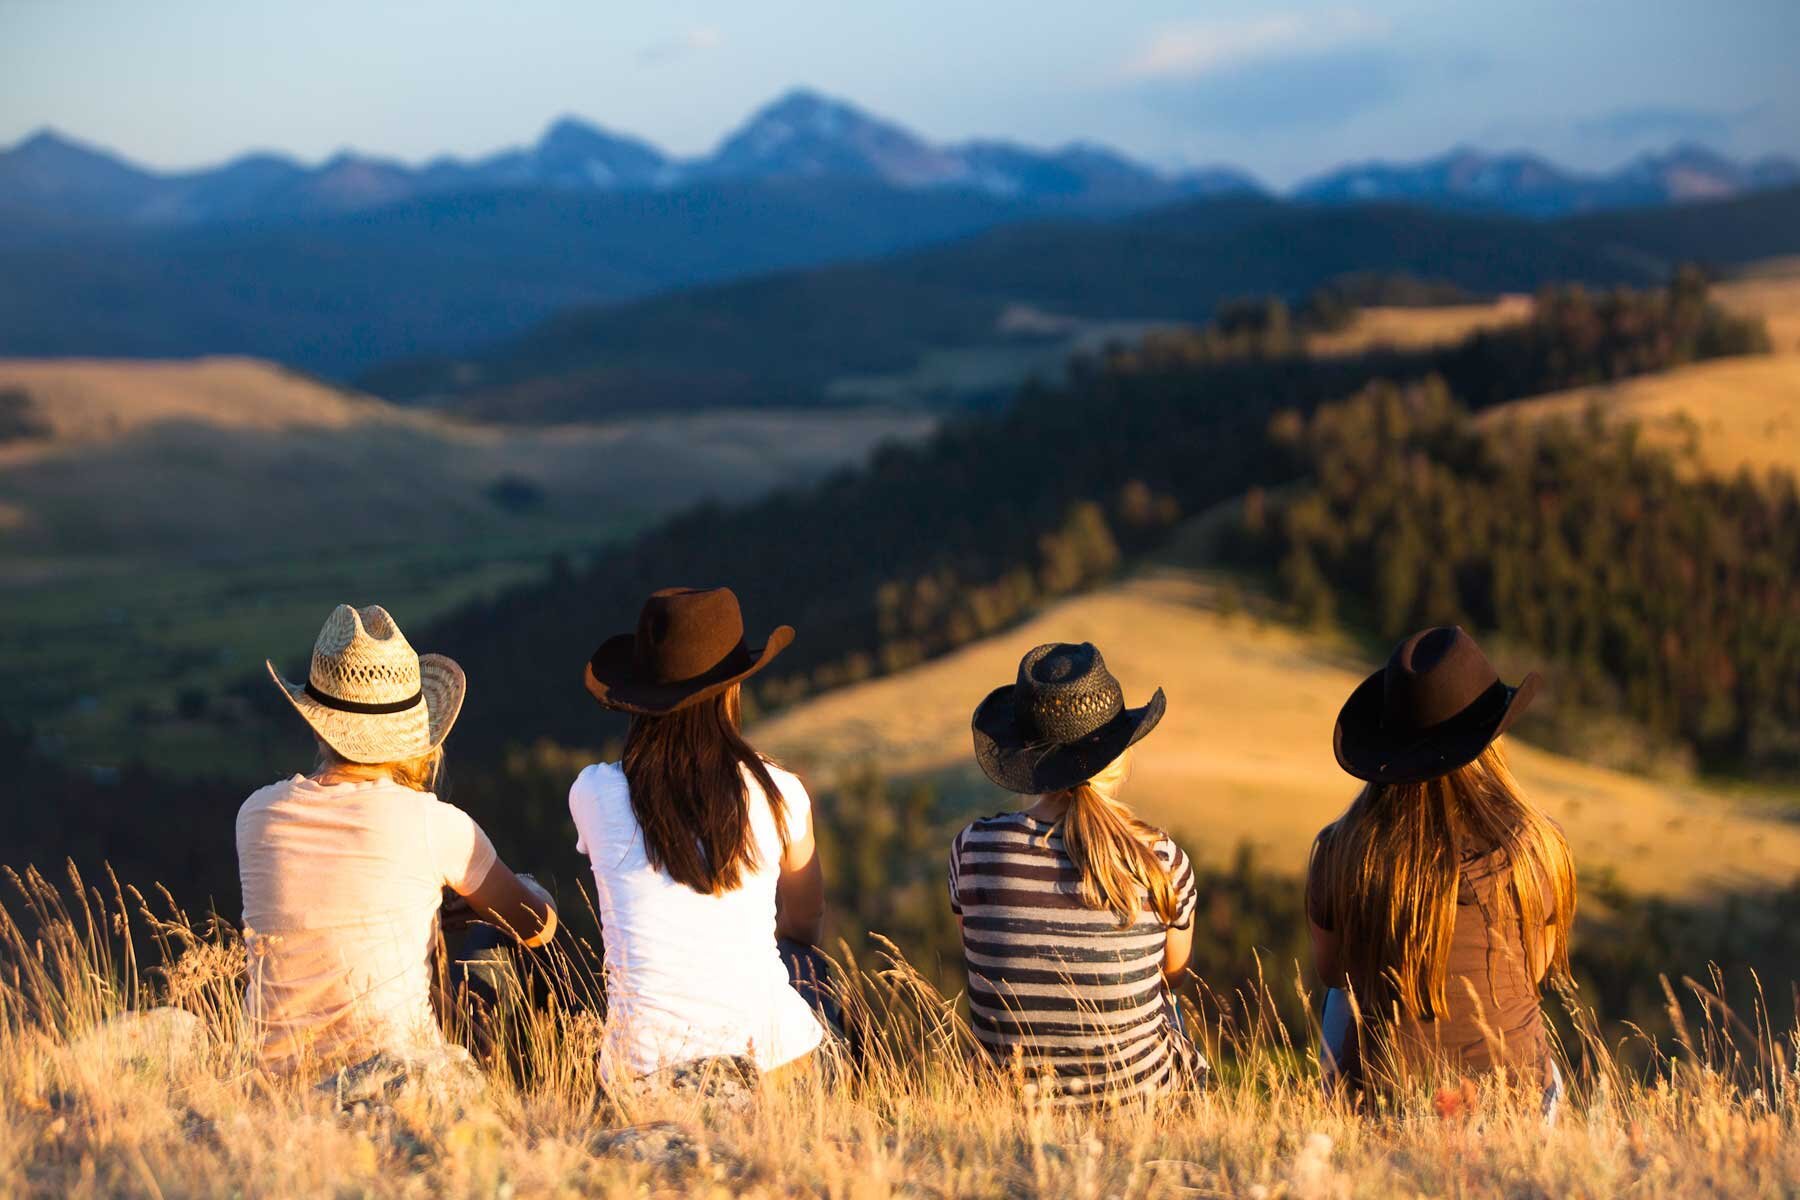   Enjoying a view after a hike to The Top of the World (photo credit: The Ranch at Rock Creek)  